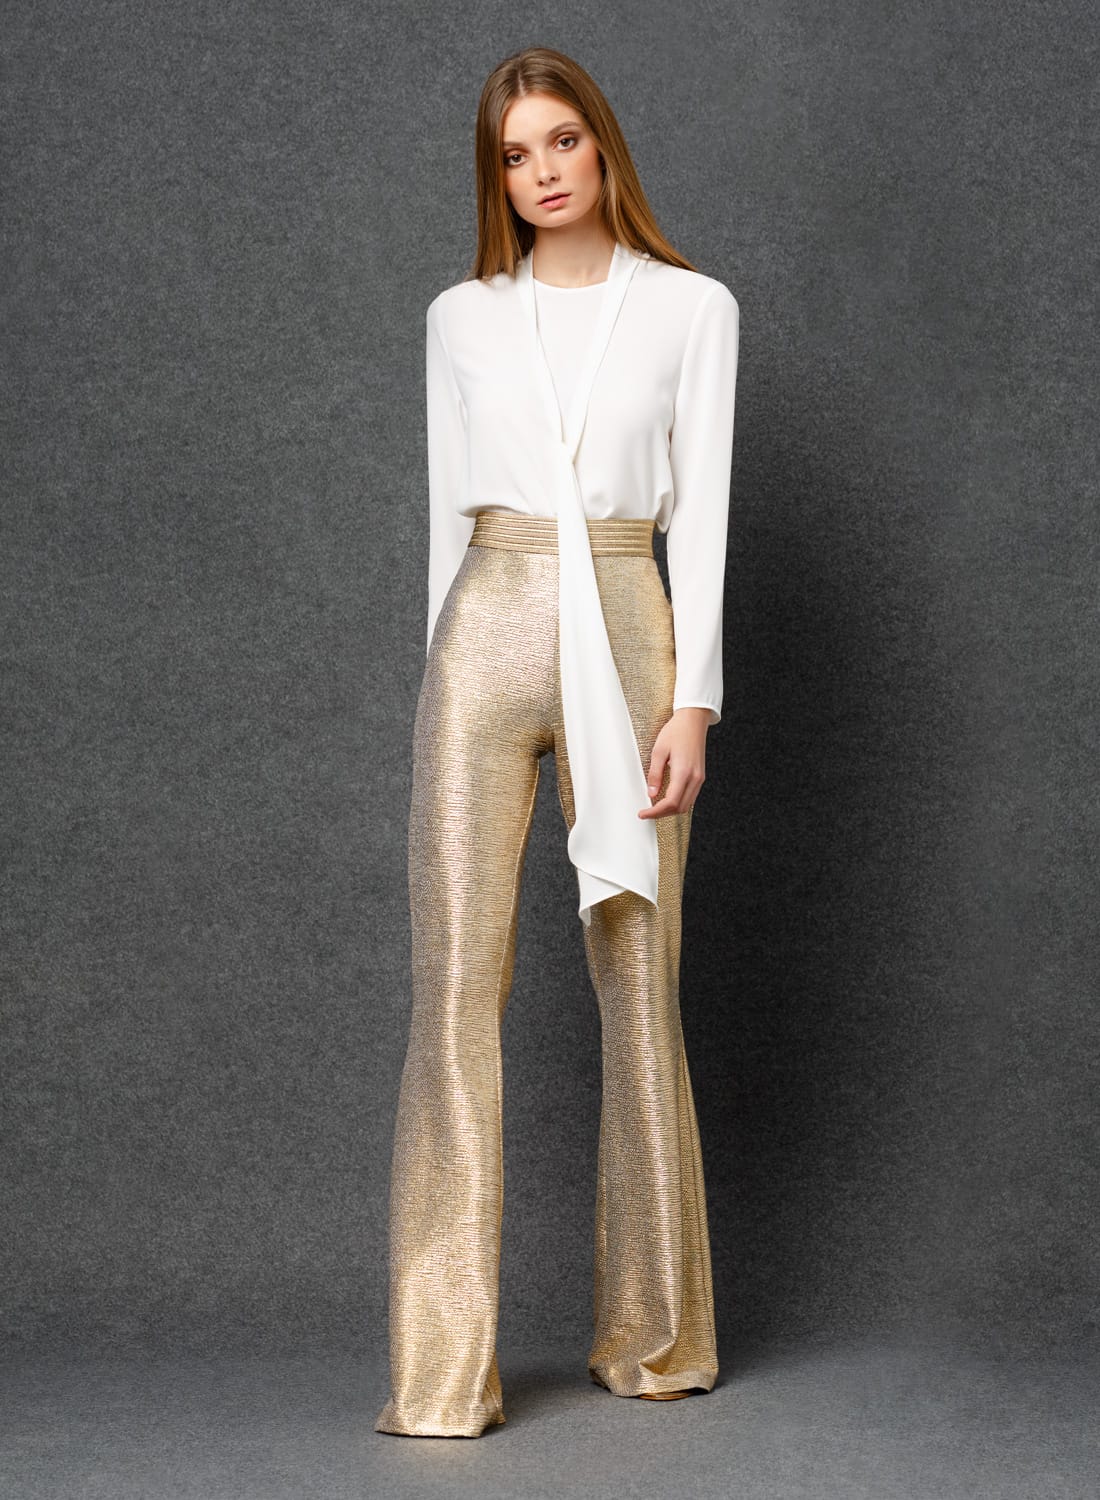 Party trousers for ladies 2020